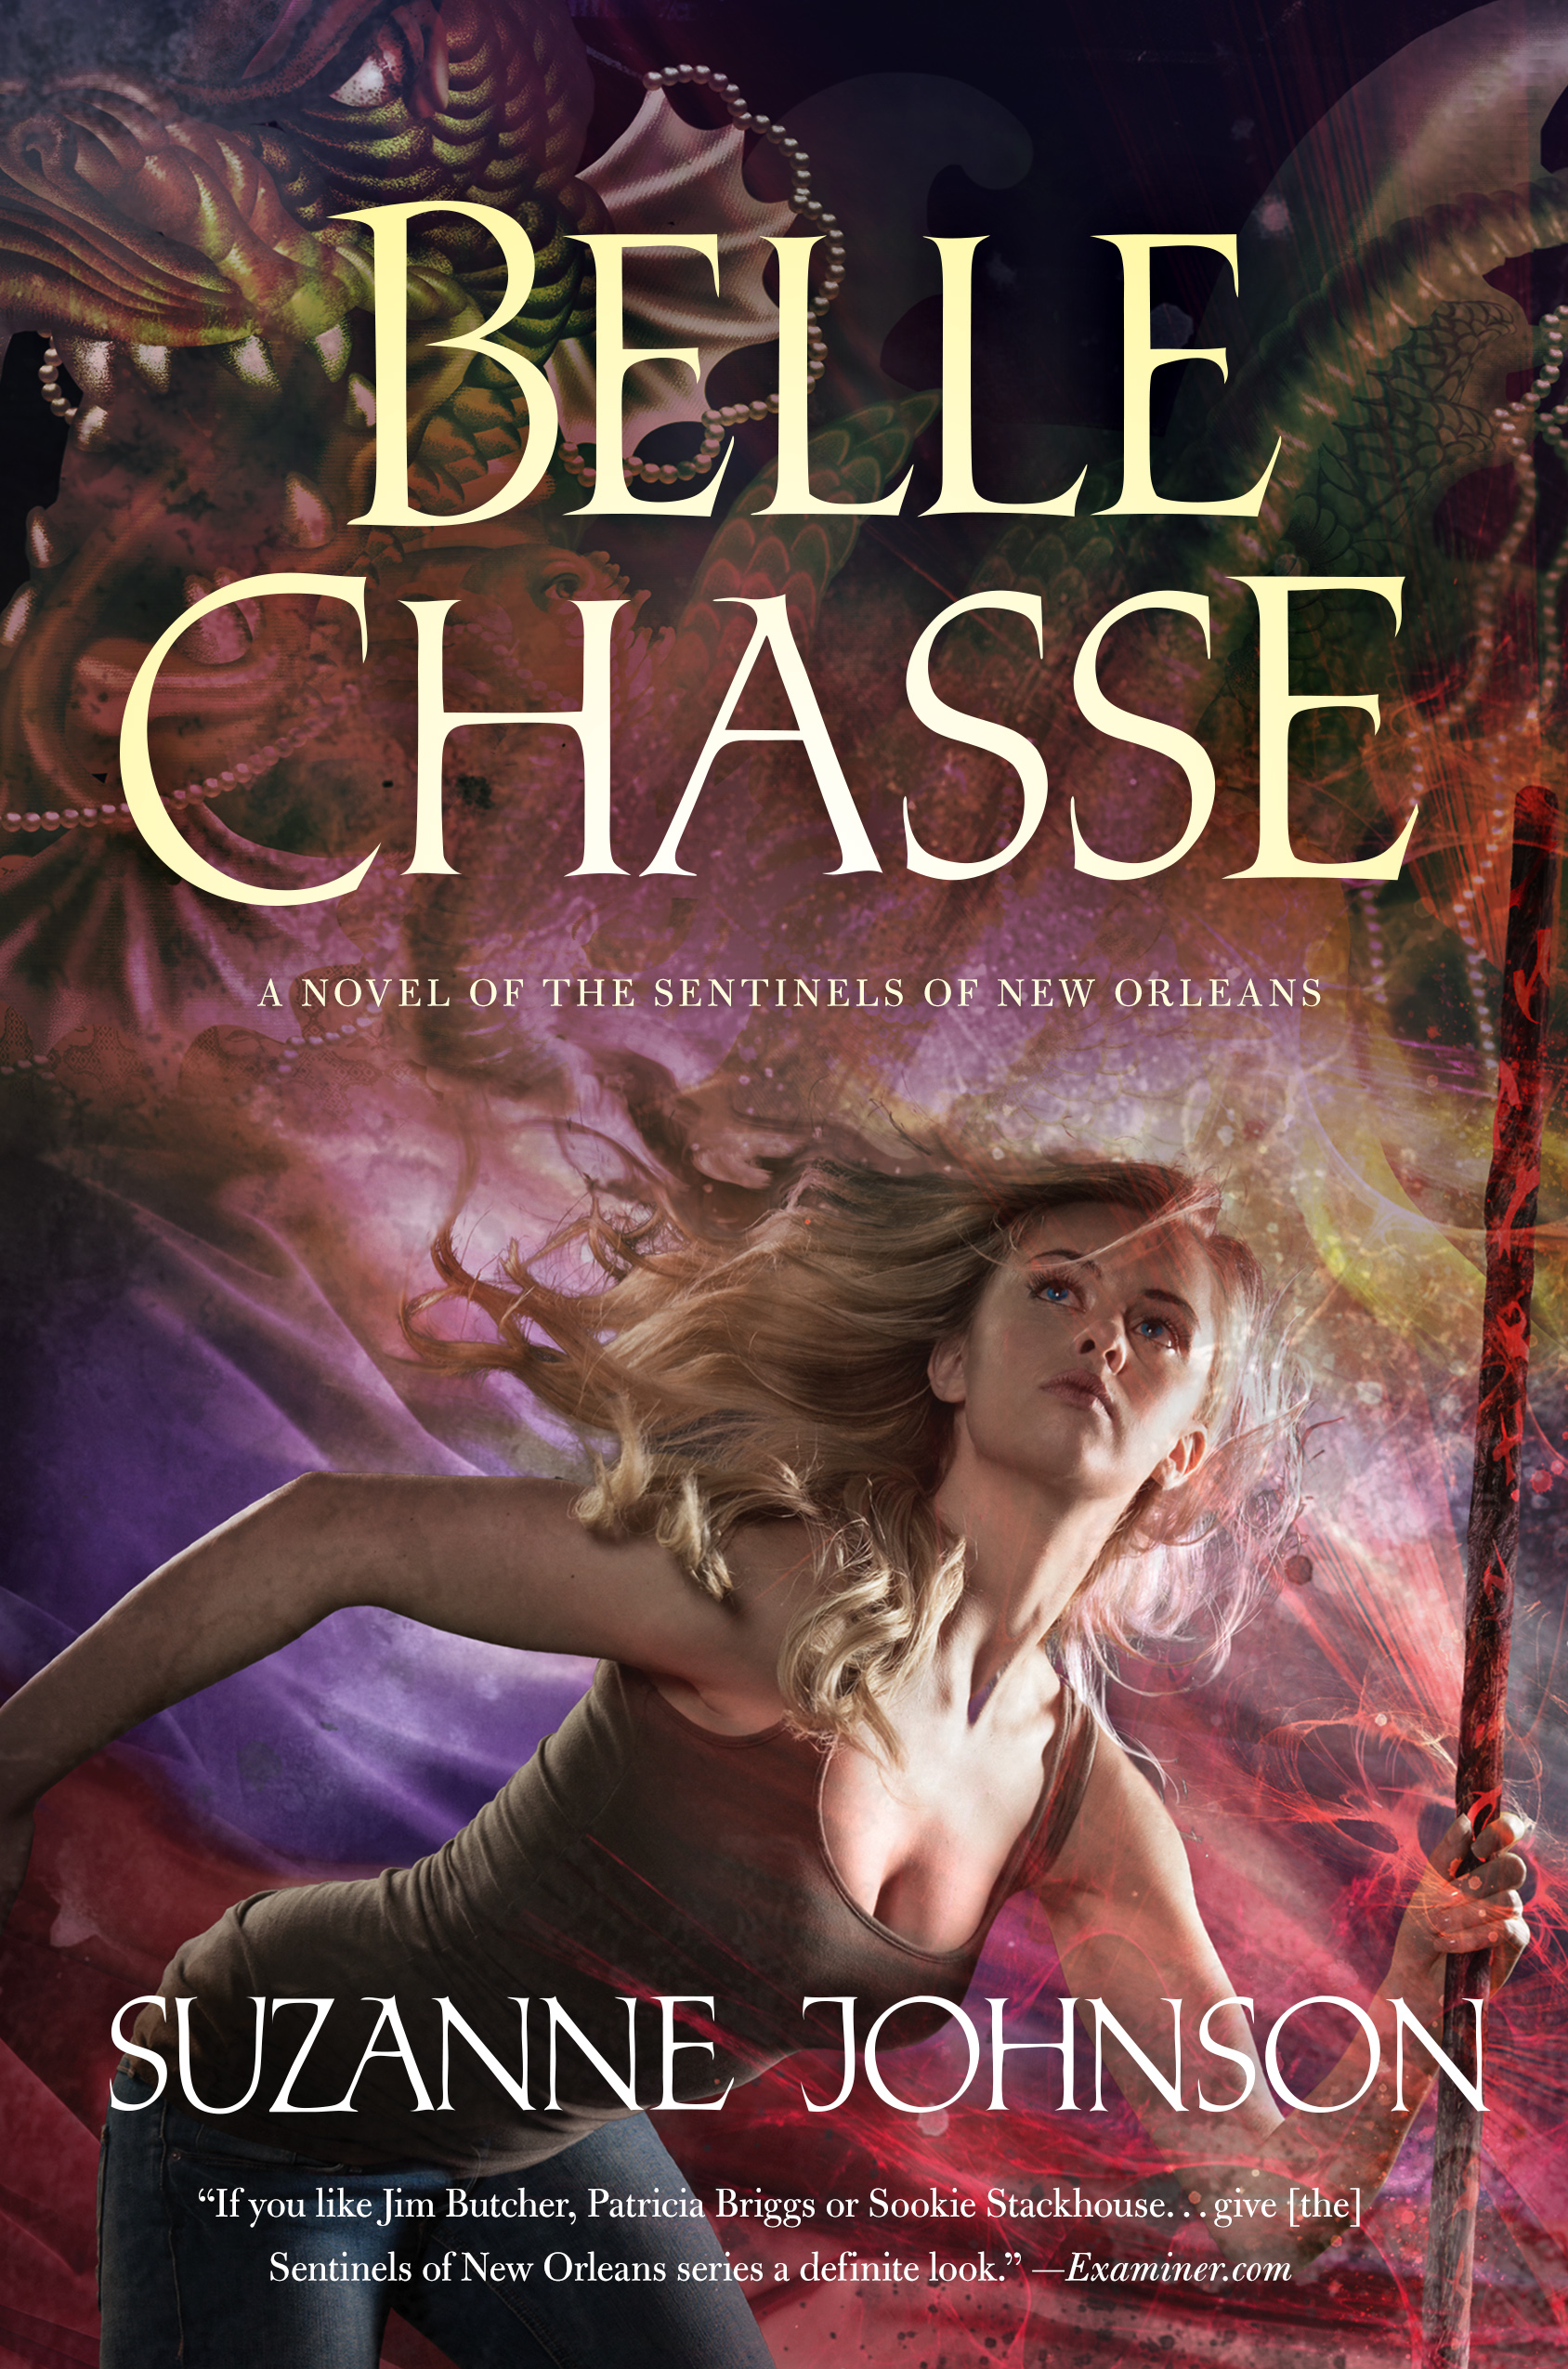 Belle Chasse : A Novel of The Sentinels of New Orleans by Suzanne Johnson